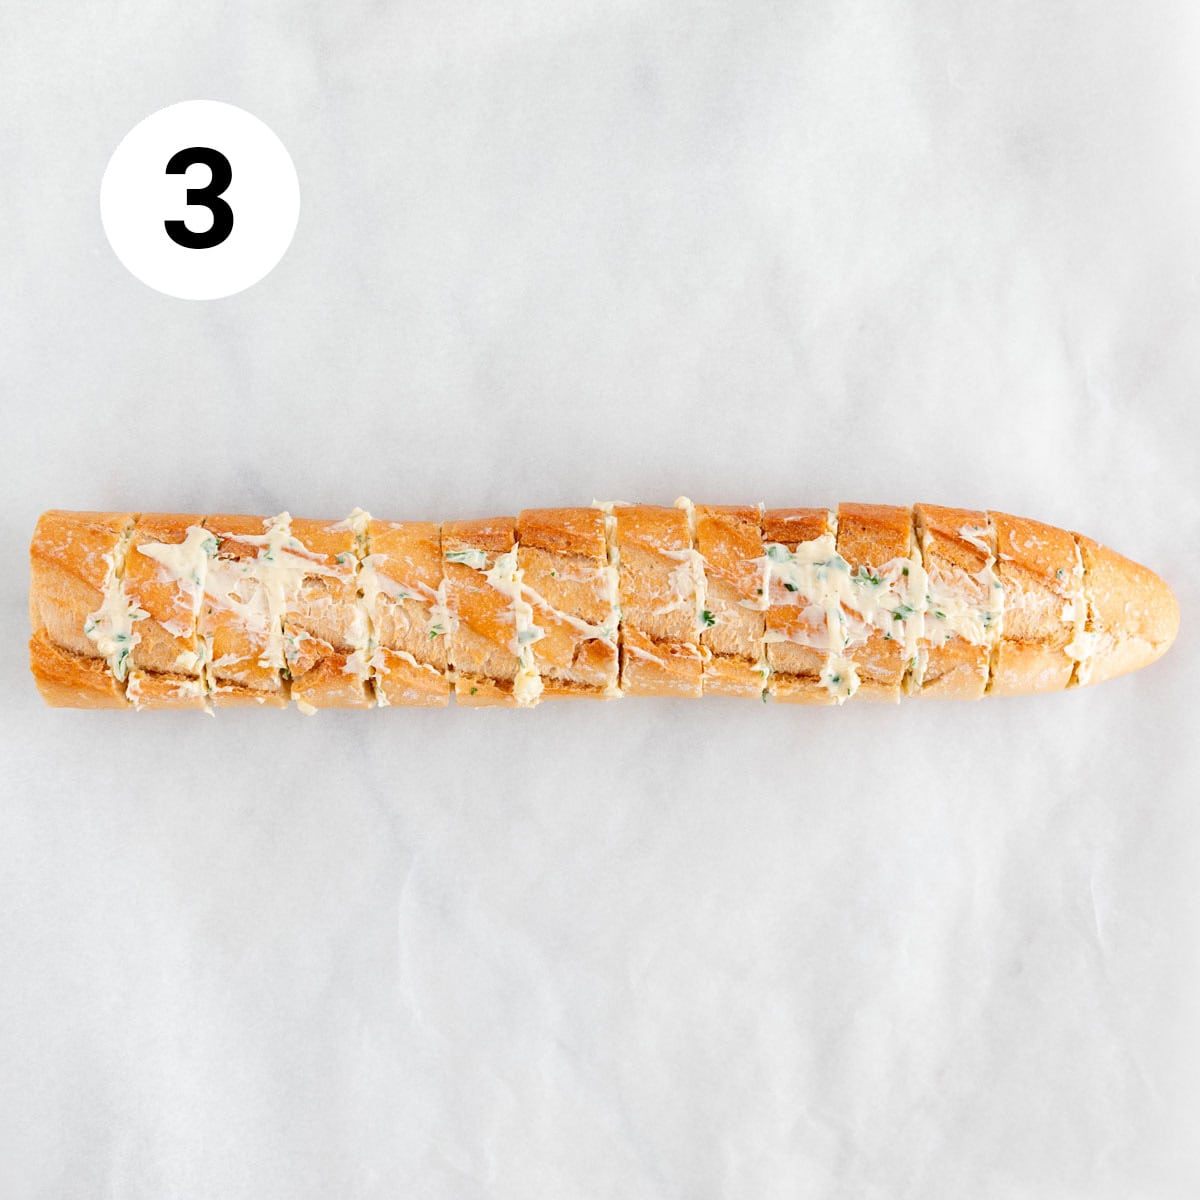 Sliced baguette spread with butter mixture.